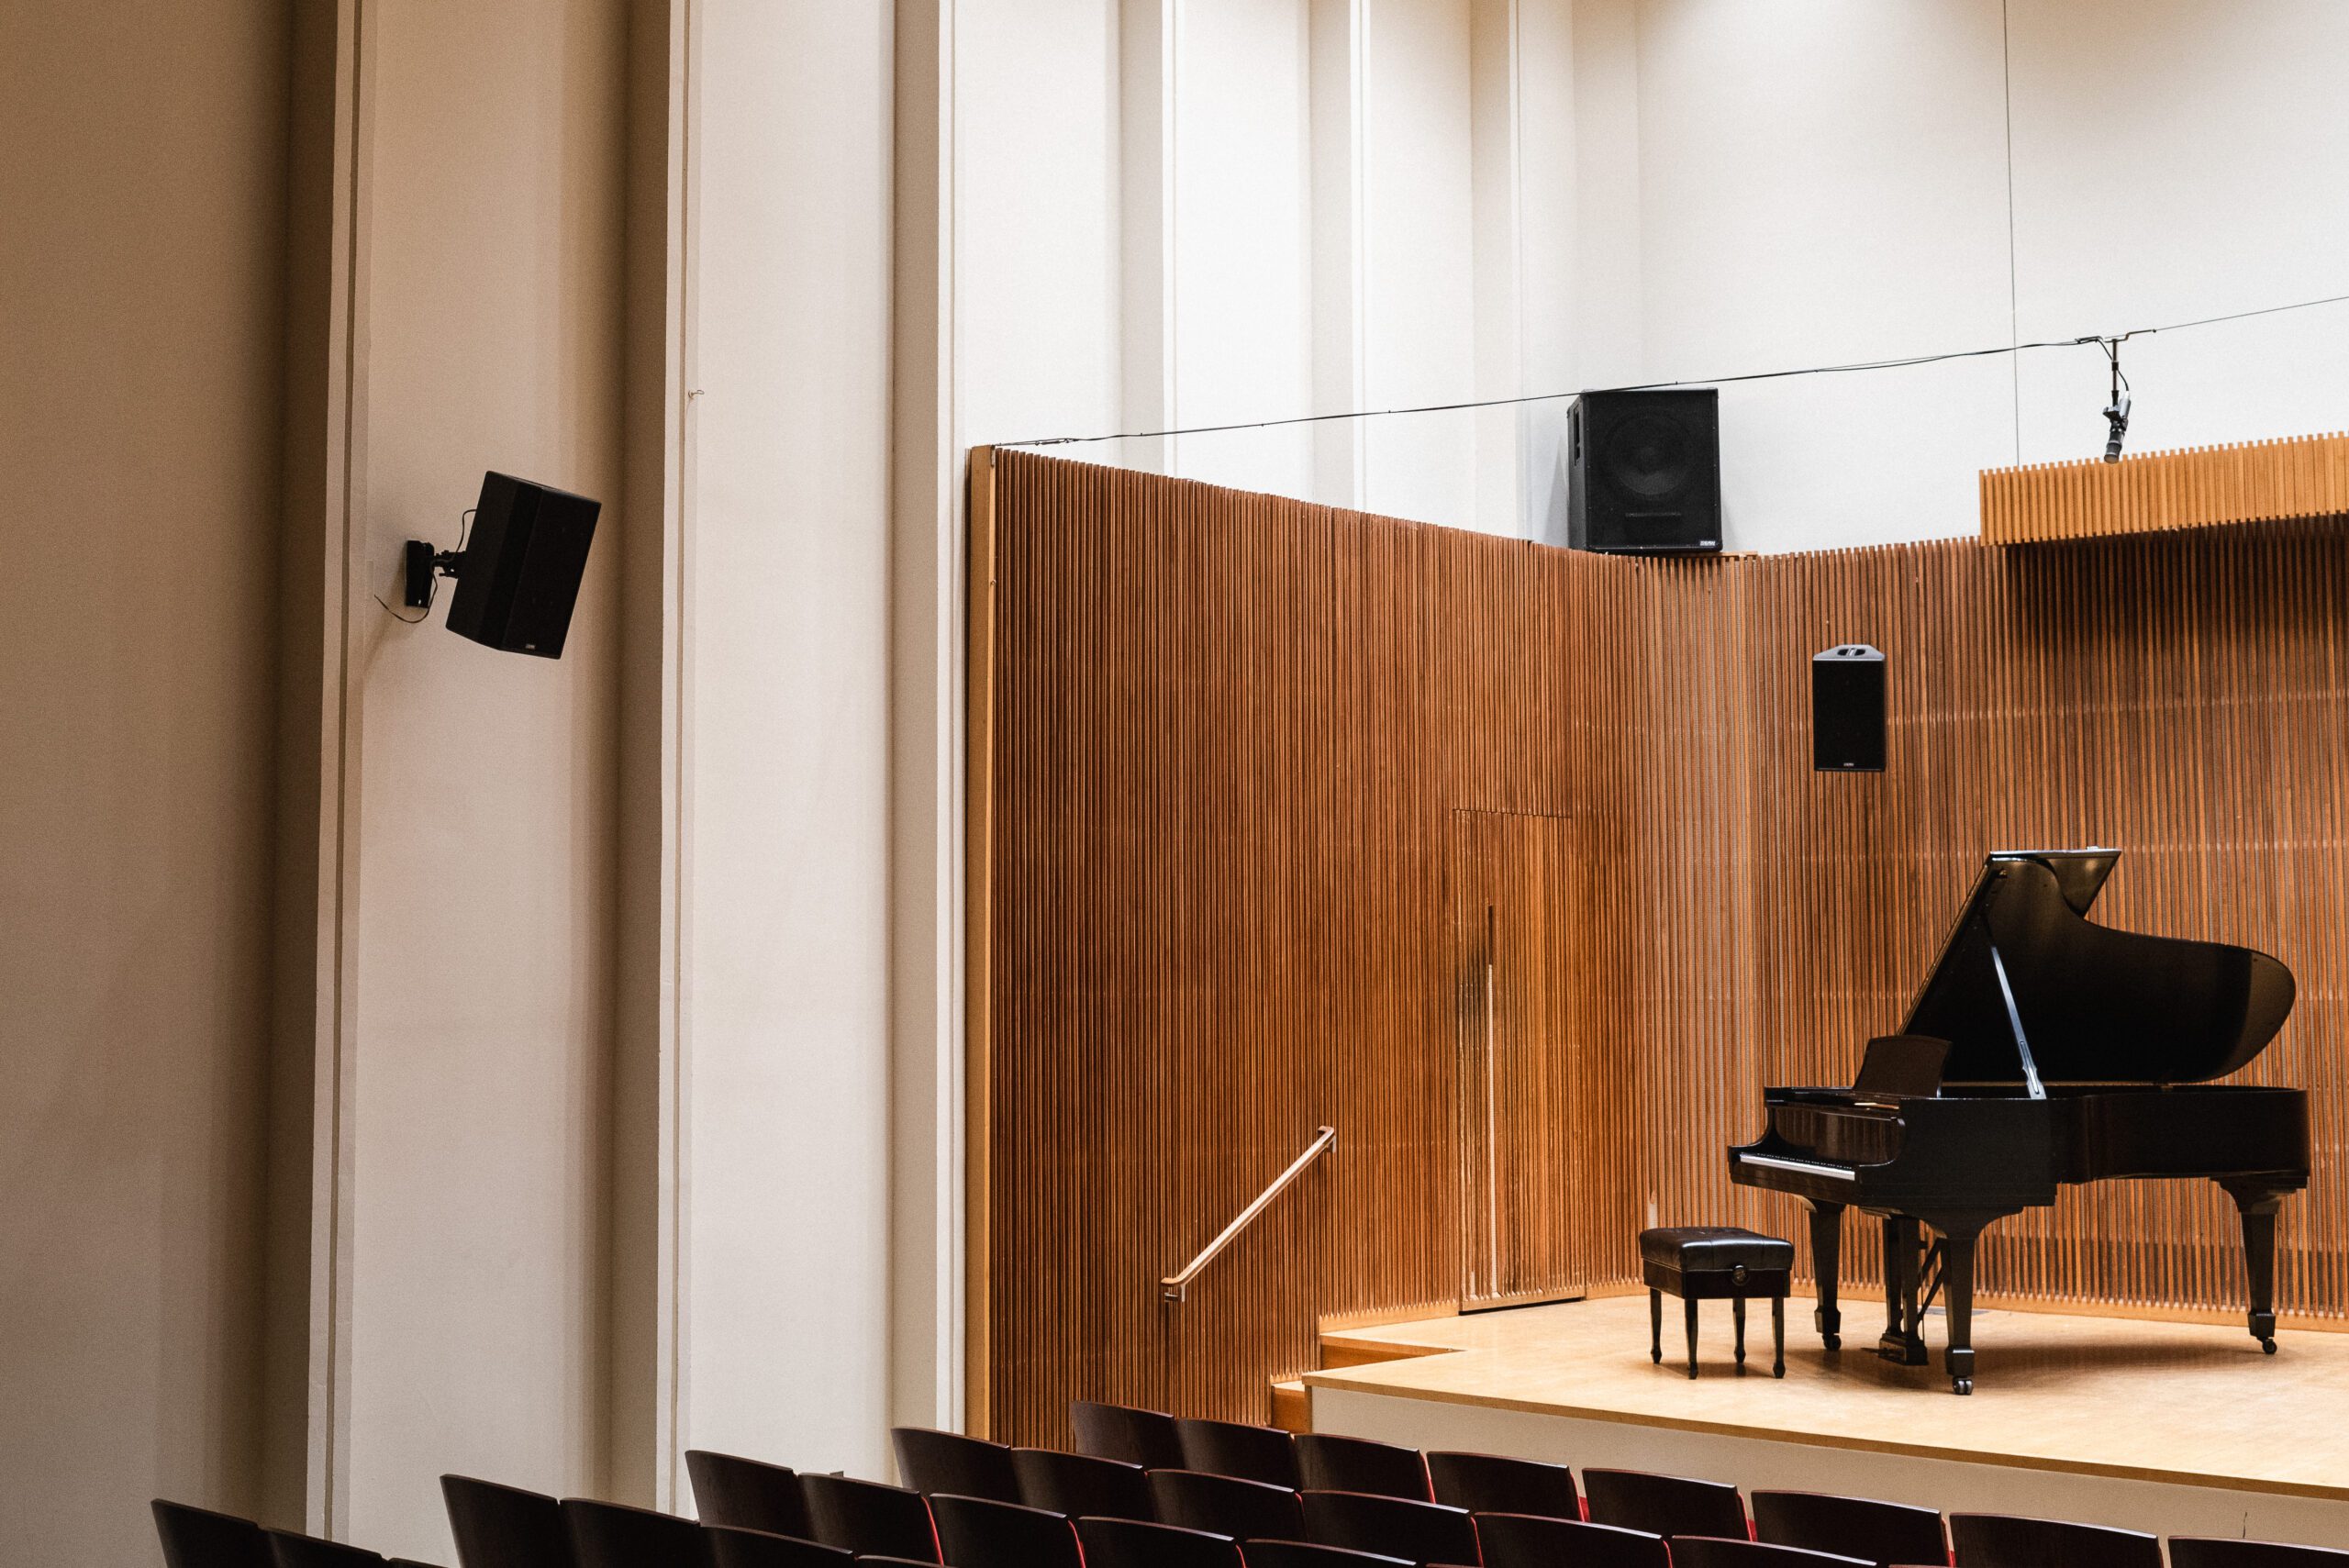 A grand piano on a recital stage.